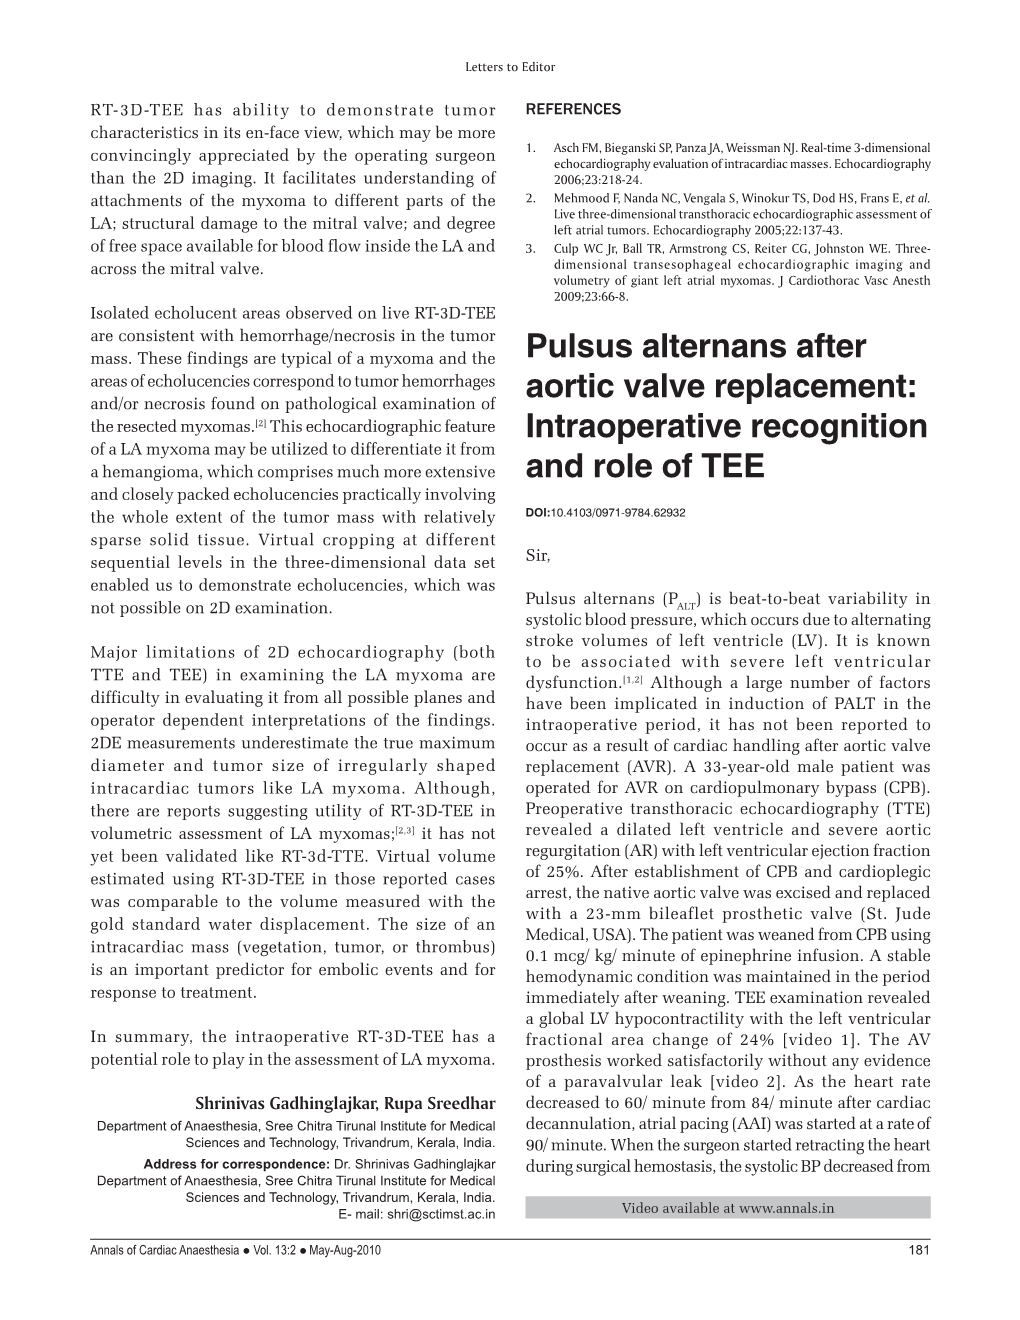 Pulsus Alternans After Aortic Valve Replacement